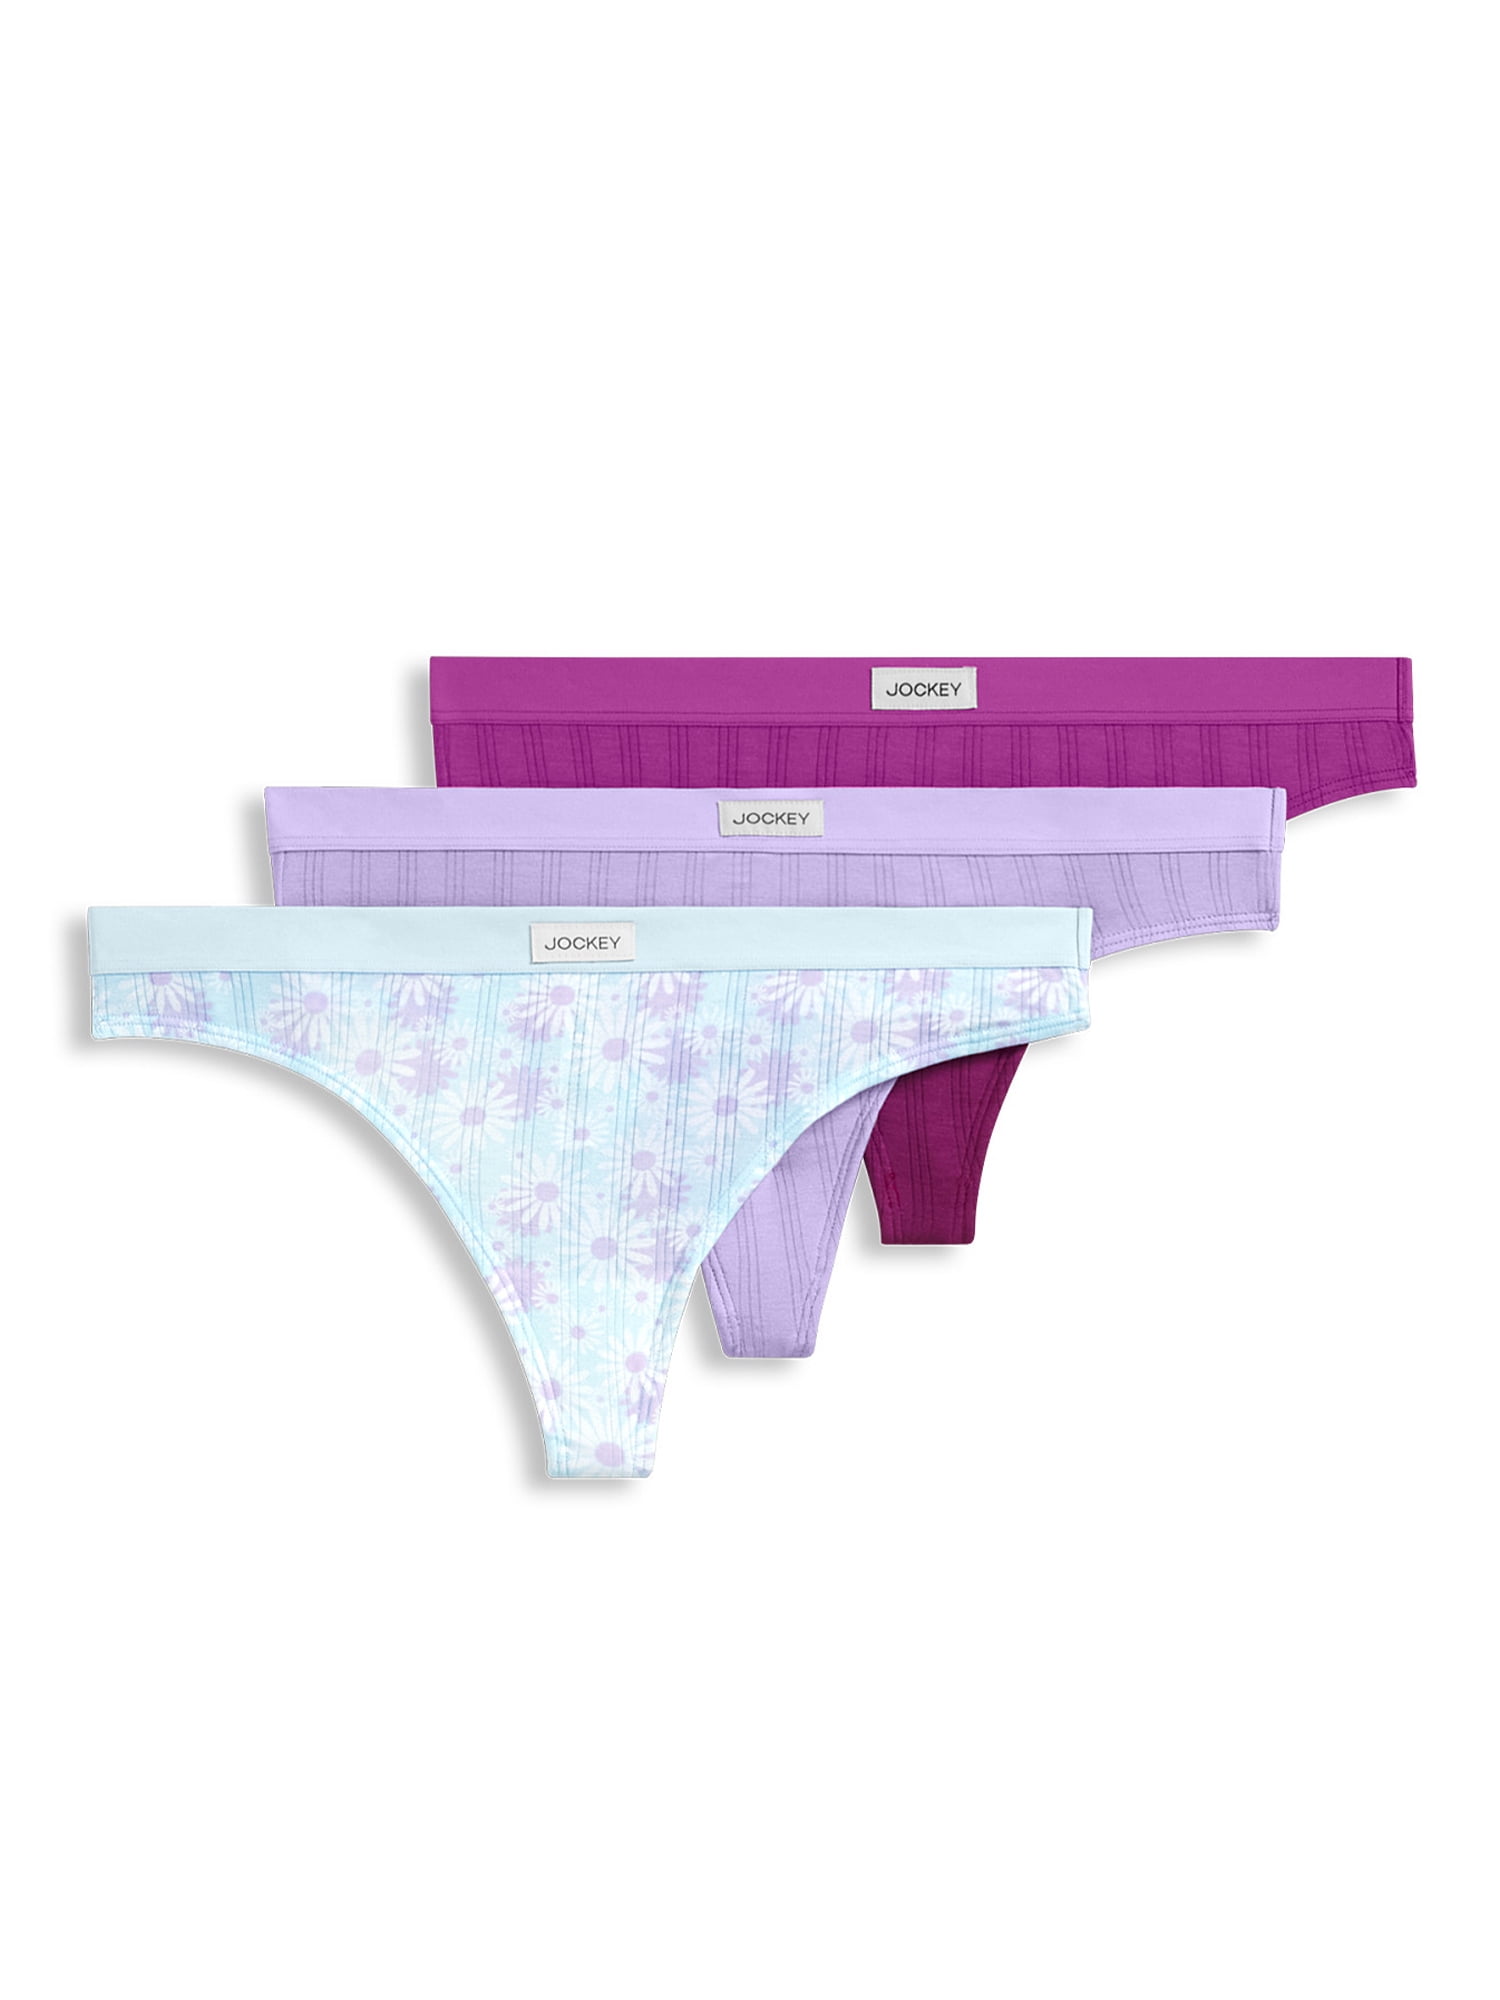 Wholesale jockey panties sizing In Sexy And Comfortable Styles